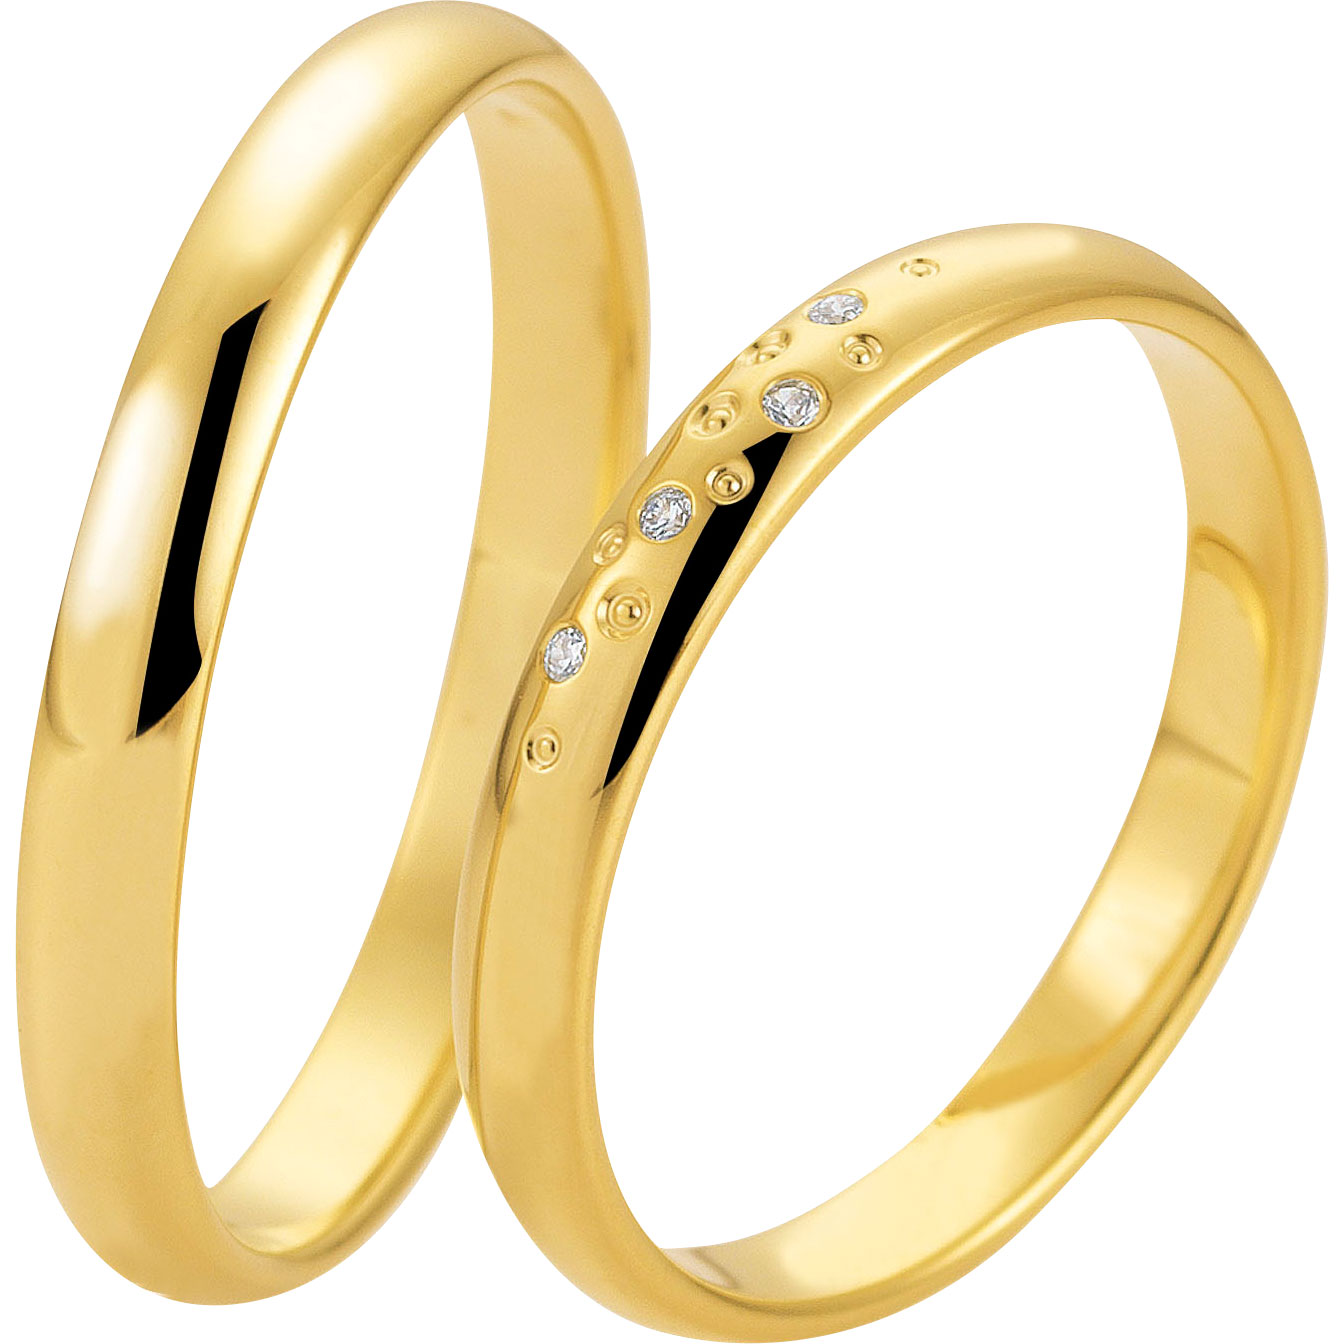 Get your custom ring design and custom made 18k gold plated silver ring